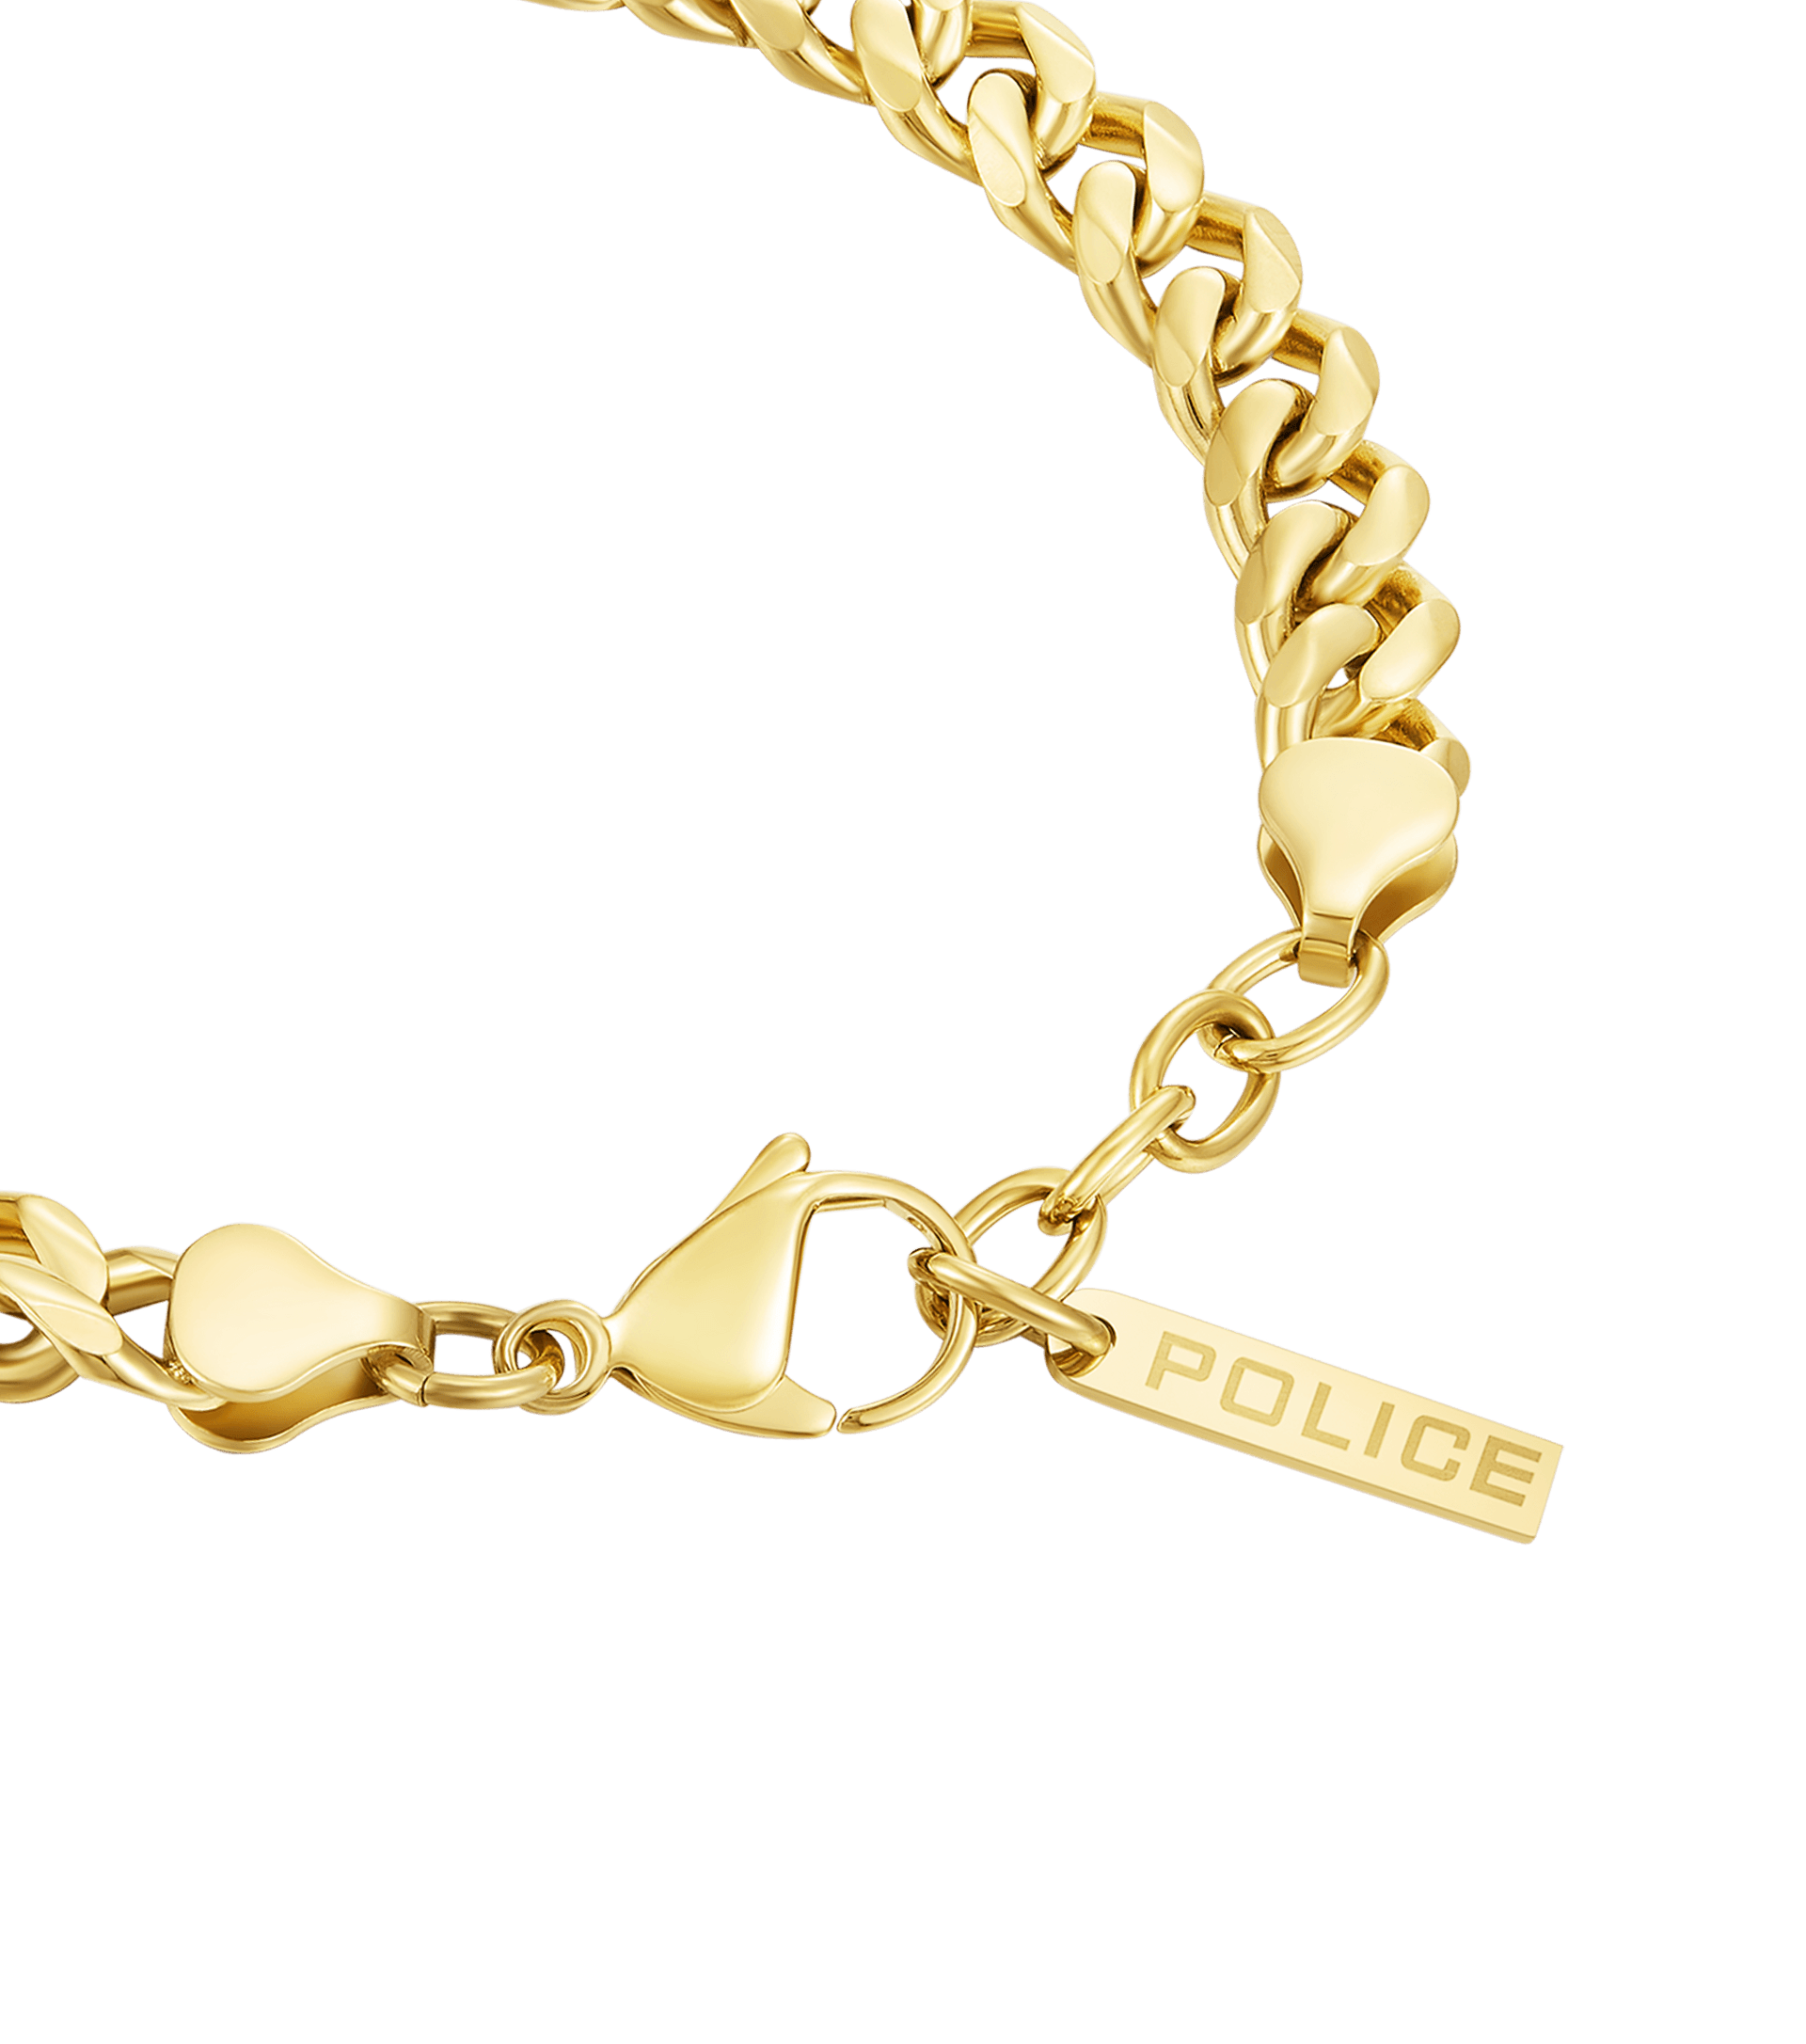 Police jewels - Salute II Bracelet Men Police By For PEAGB0010101